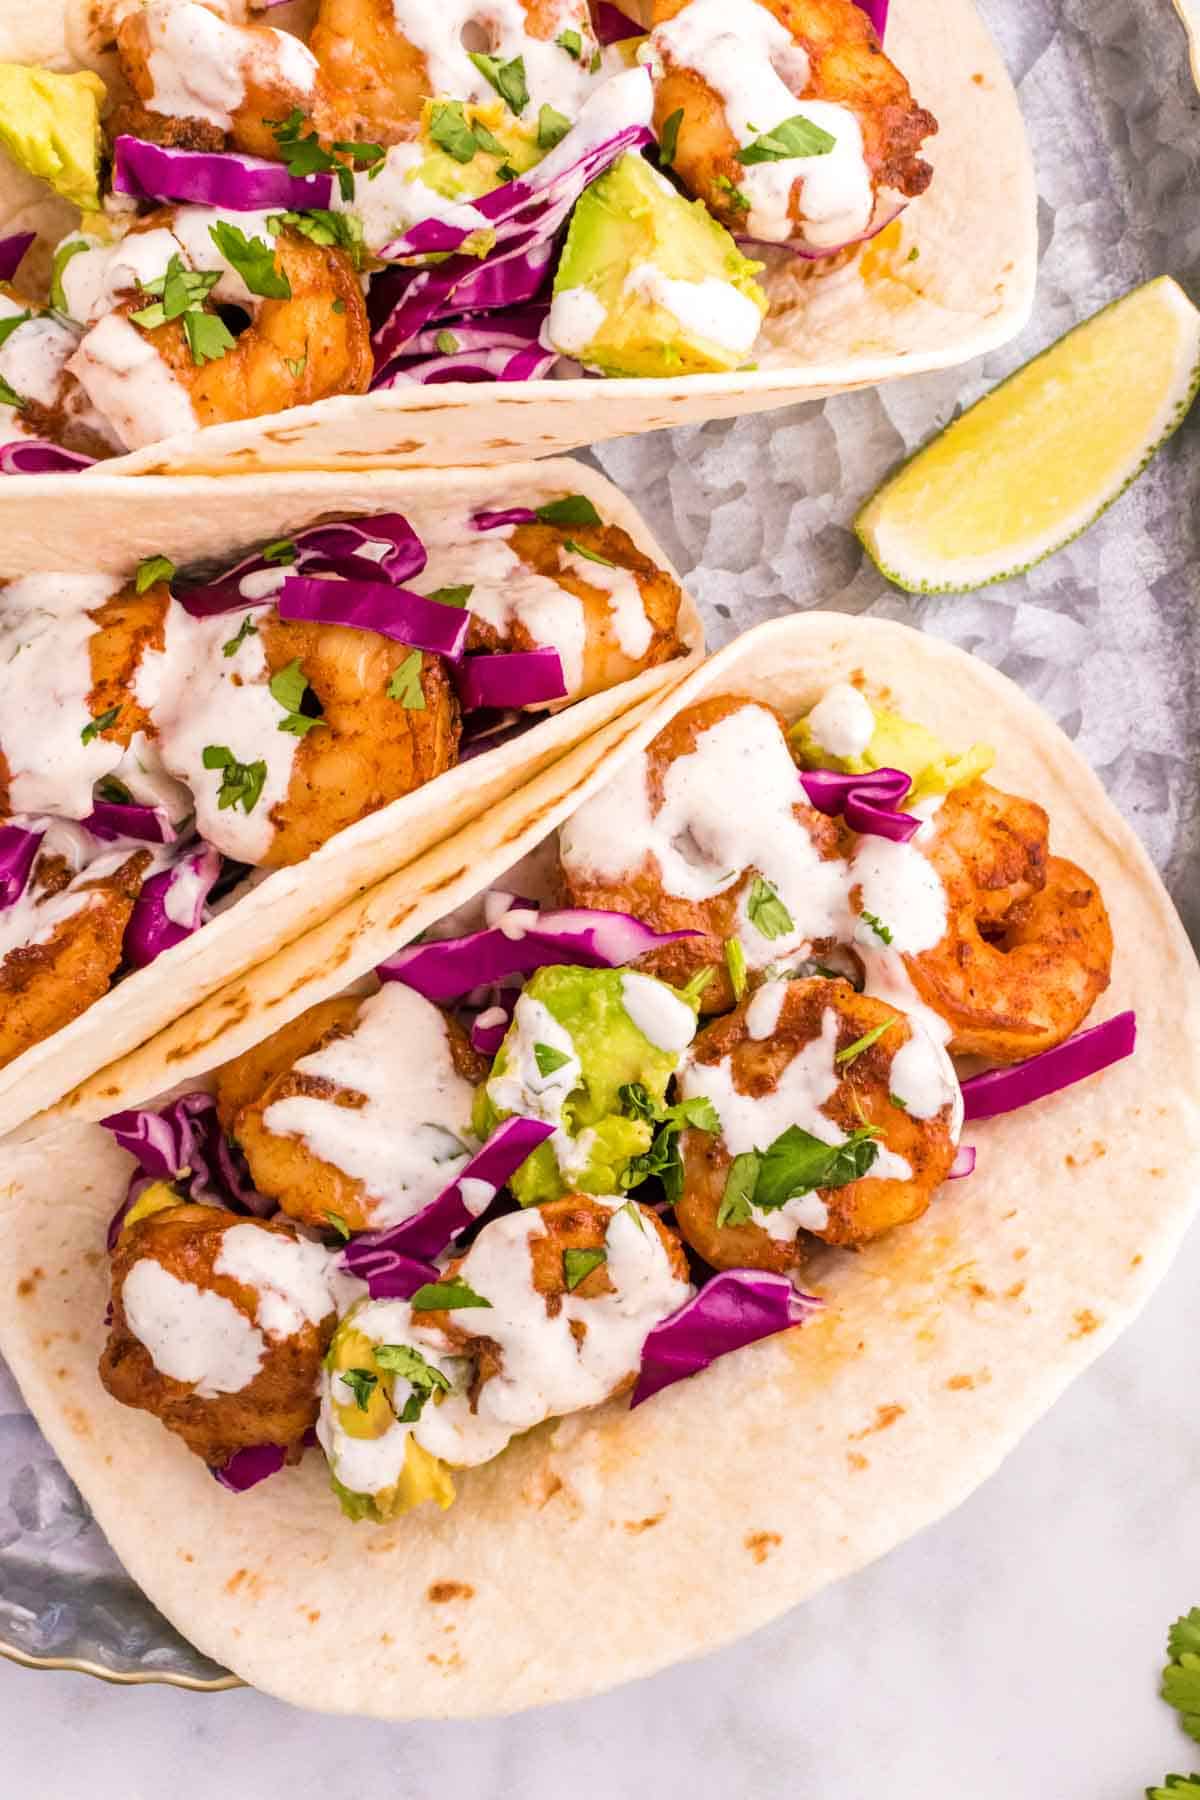 Cilantro Lime Shrimp Tacos are tasty tacos with seasoned shrimp, sliced red cabbage, diced avocados and a creamy dressing made with mayo, Greek yogurt, lime juice and cilantro.